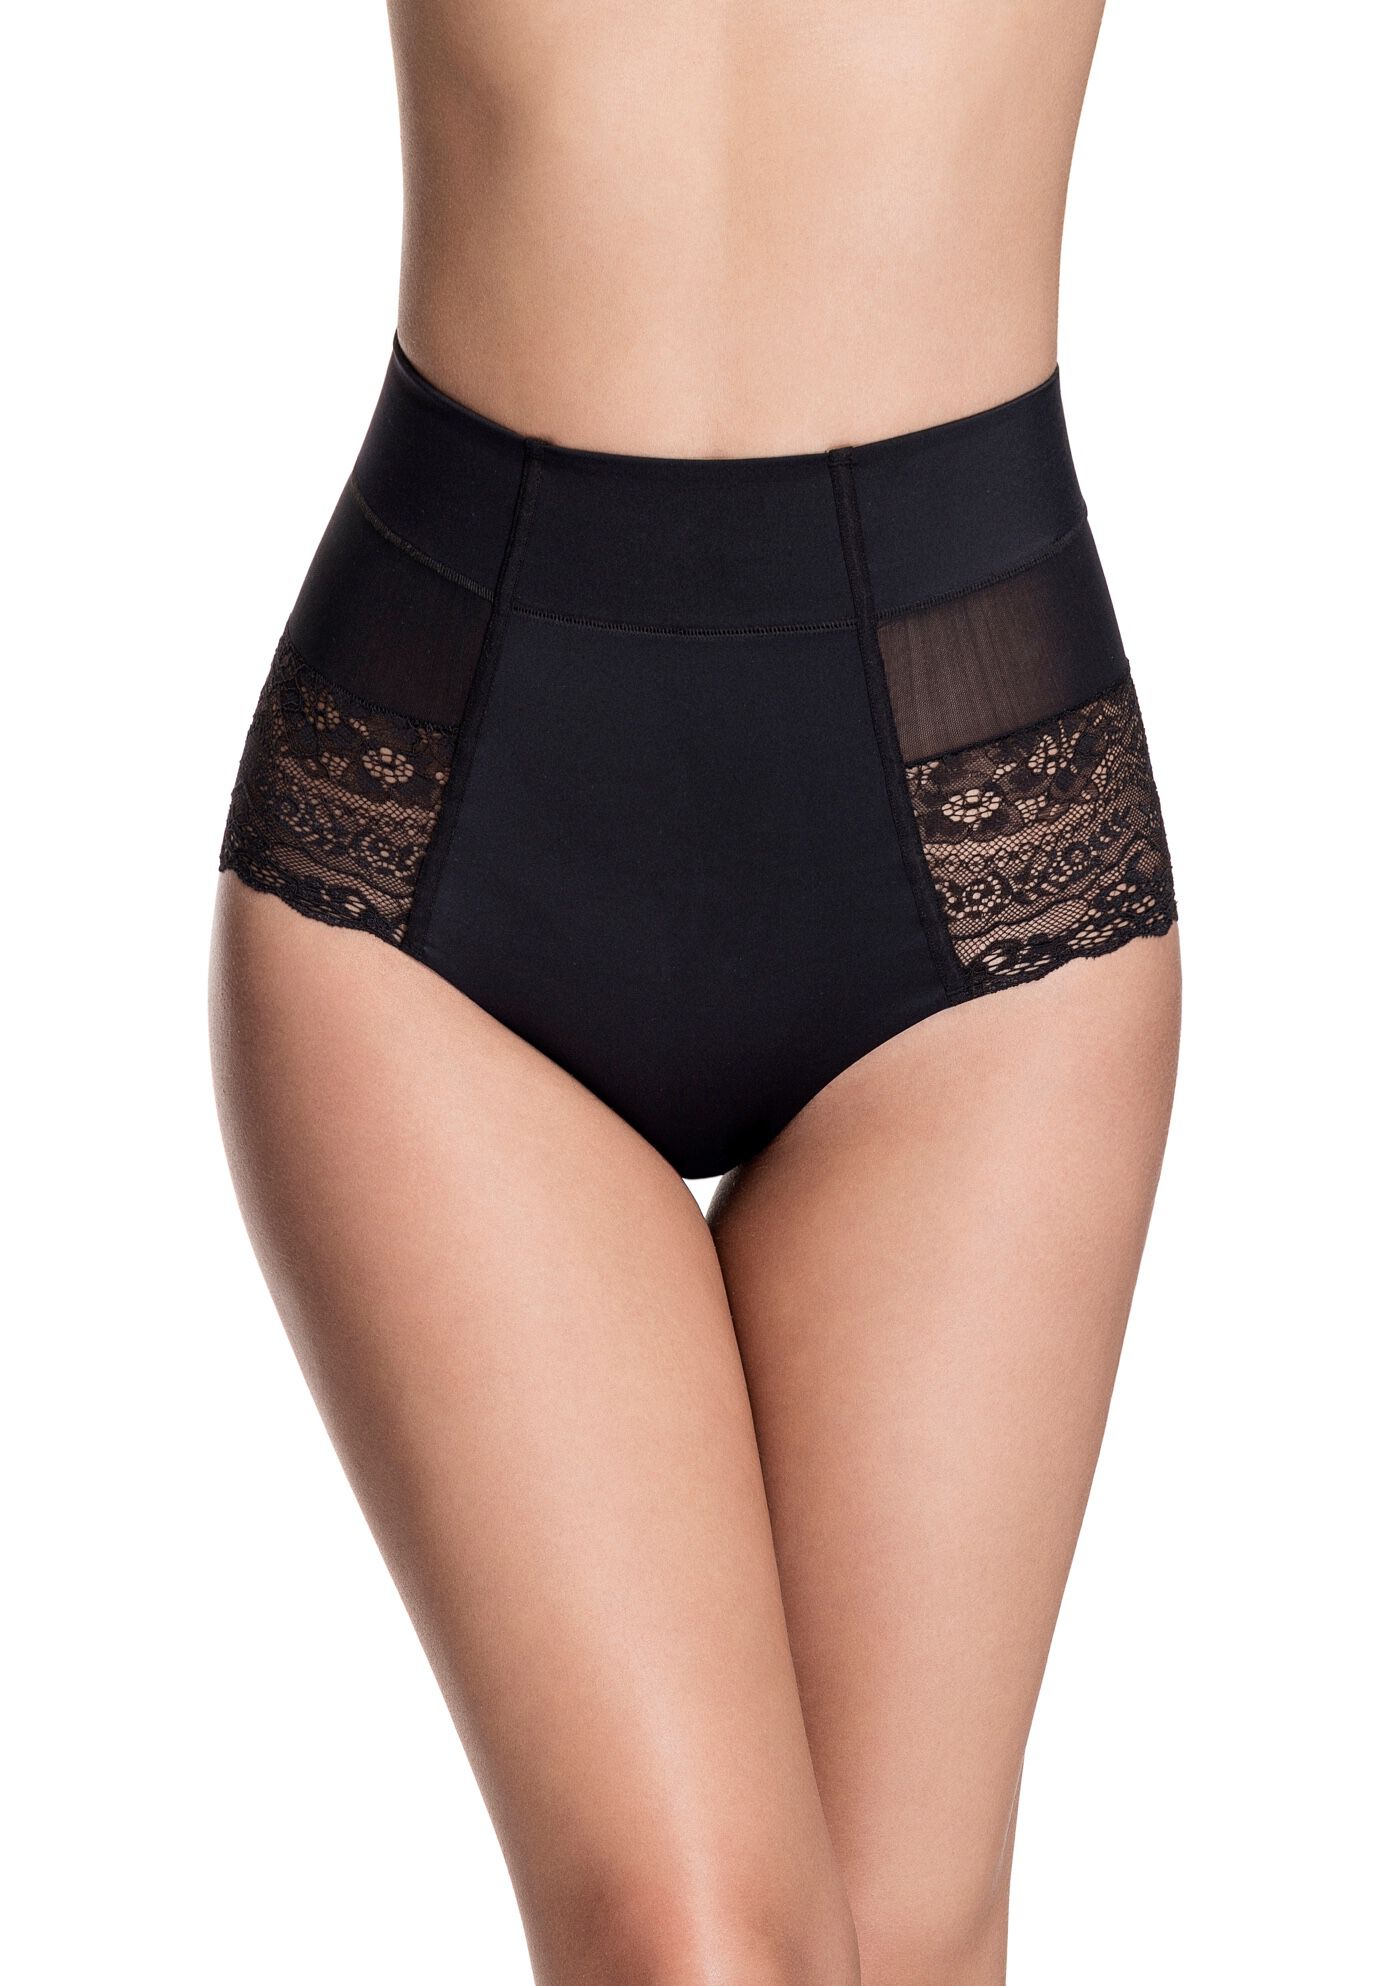 Plus Size Women's Brazilian Flair Mid Waist Brief by Squeem in Black (Size XS)